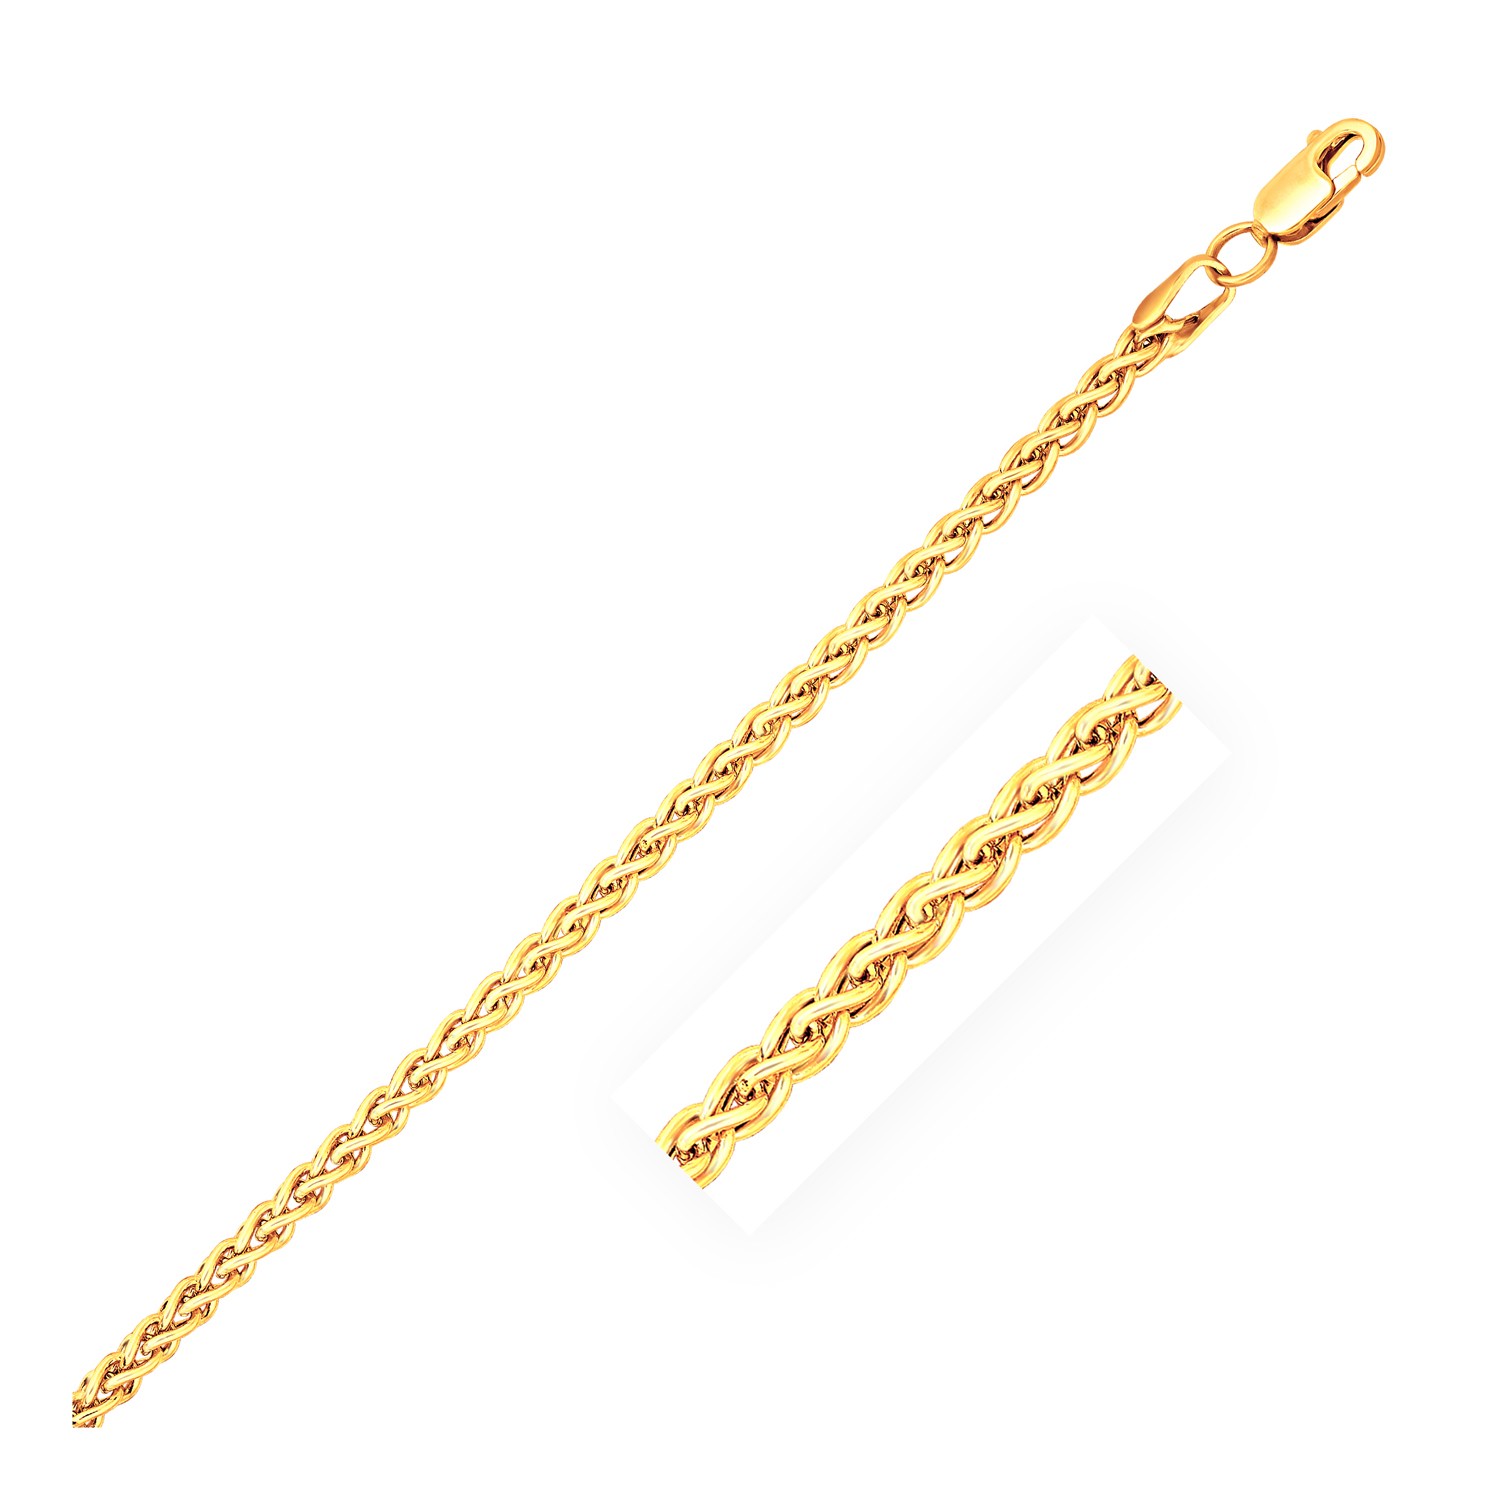 ROUND WHEAT CHAIN 14KT GOLD ROUND WHEAT CHAIN WITH LOBSTER LOCK 16 INCHES LONG